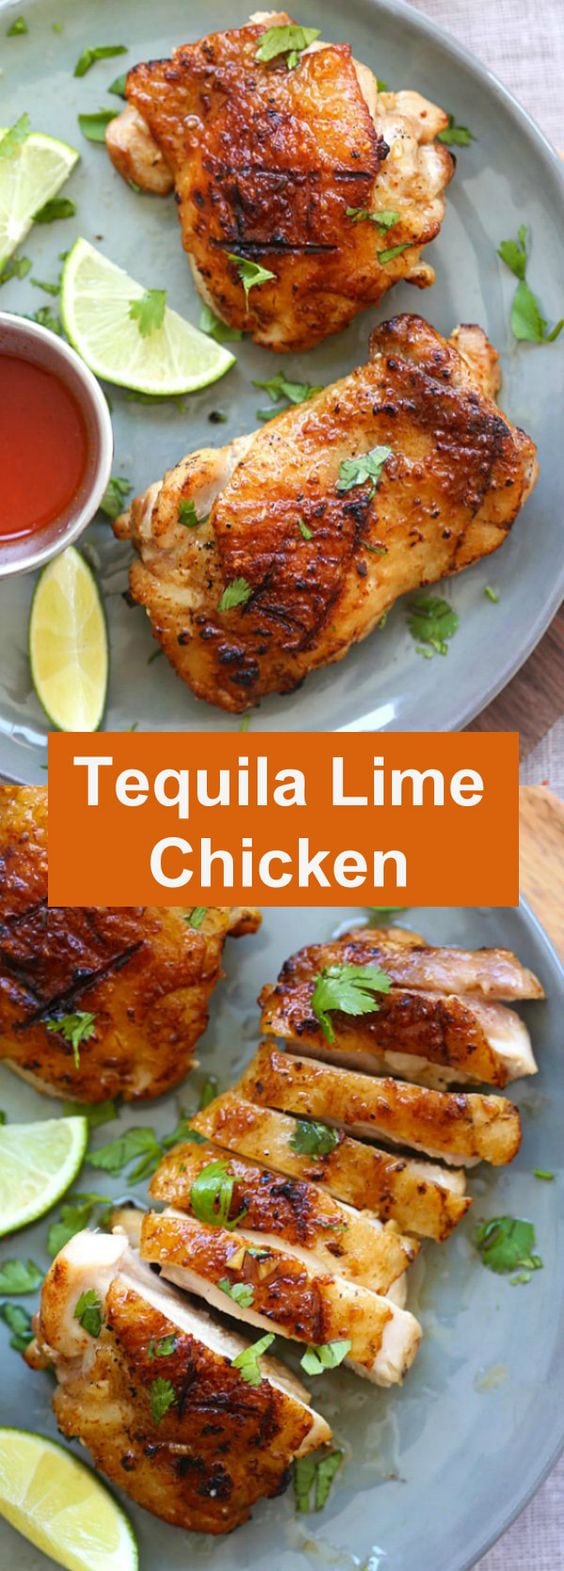 Tequila Lime Chicken | Easy Delicious Recipes